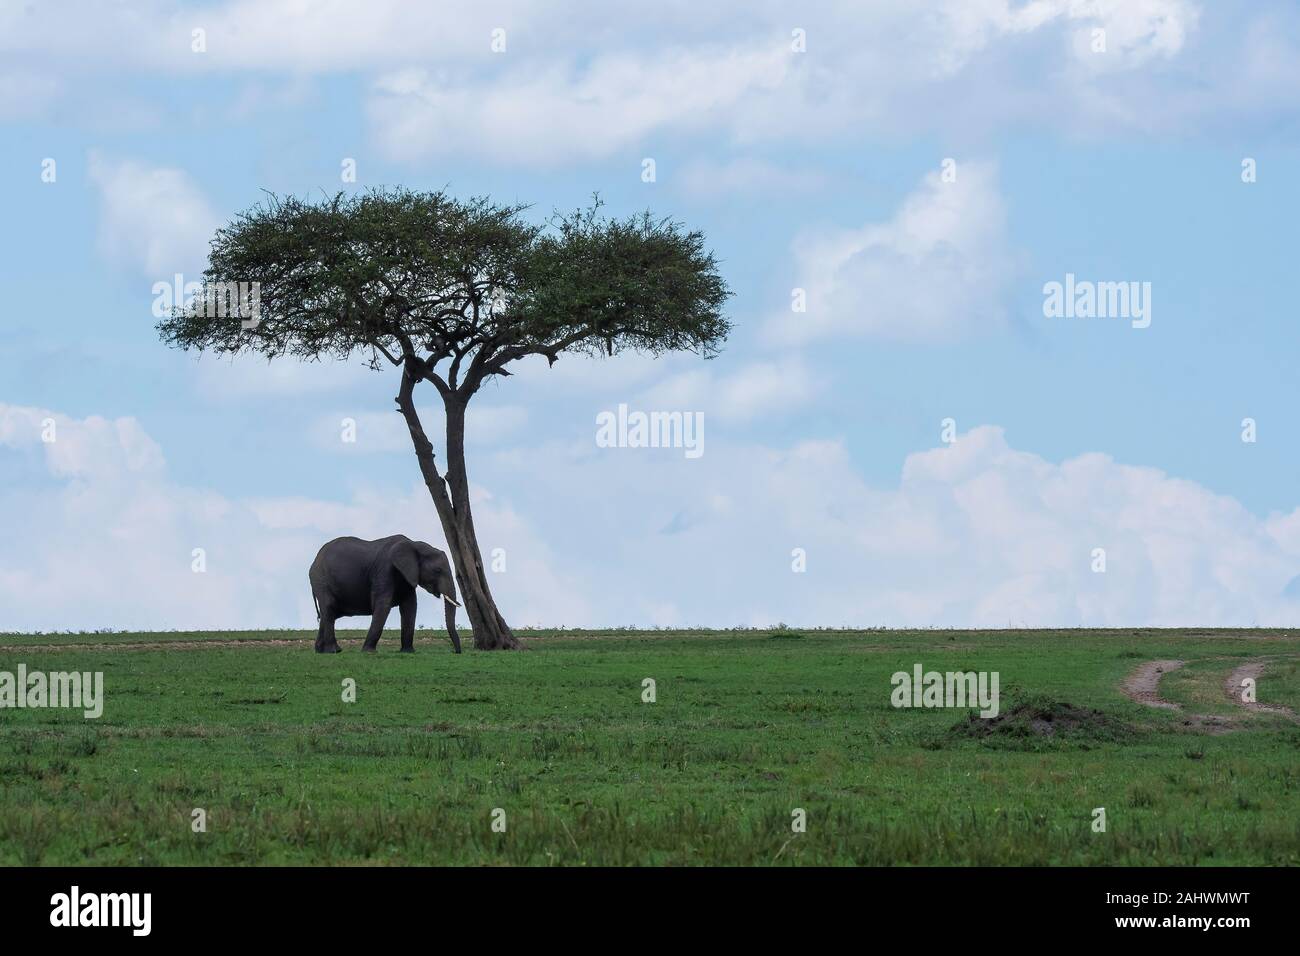 An elephant family grazing in the grasslands of africa inside Masai Mara National Reserve during a. wildlife safari Stock Photo